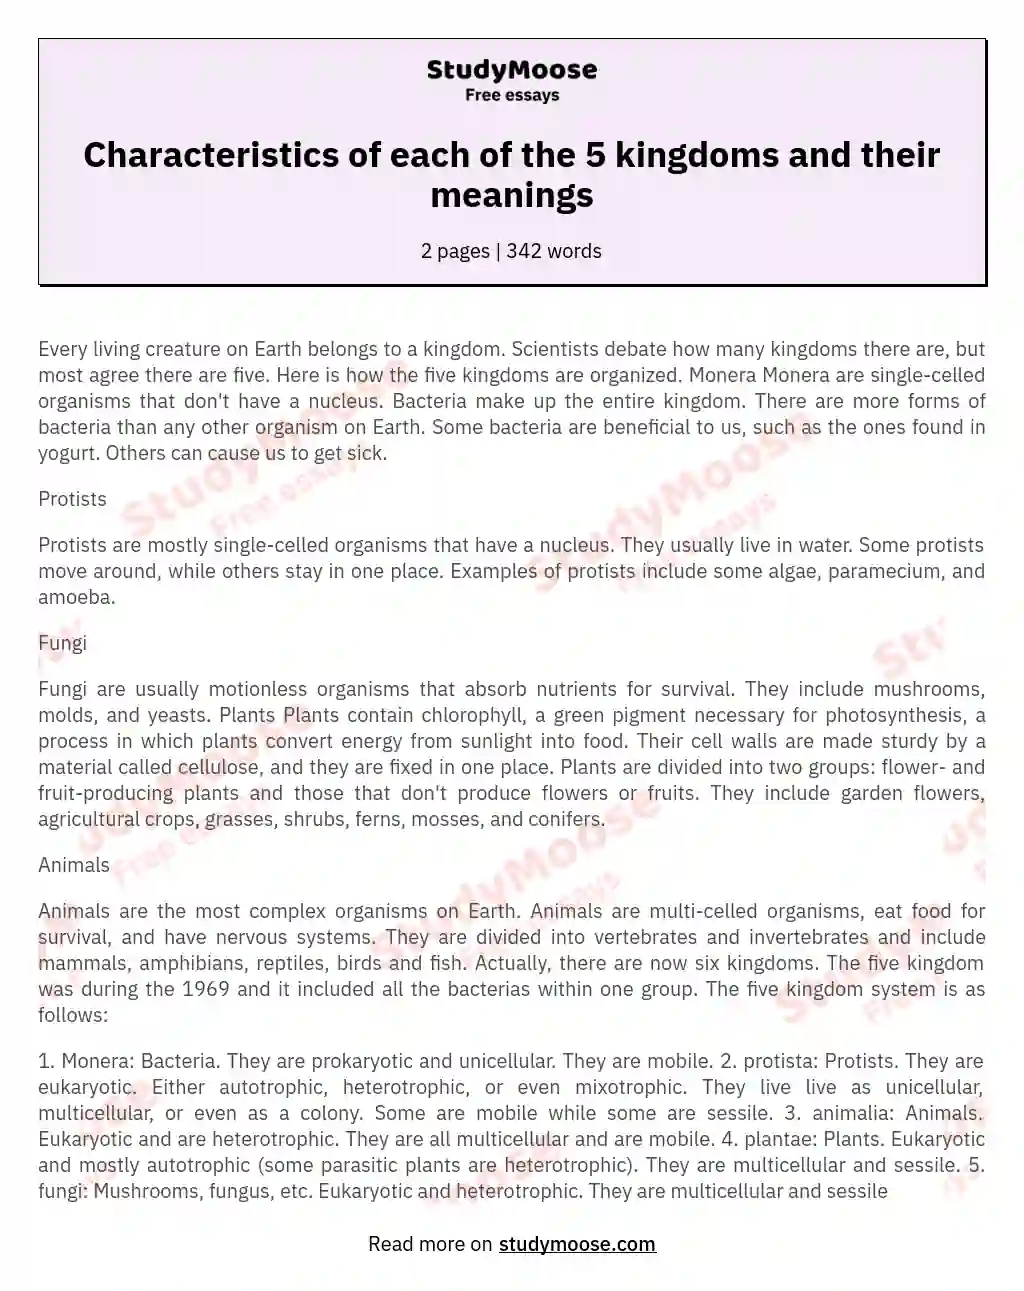 Characteristics of each of the 5 kingdoms and their meanings essay